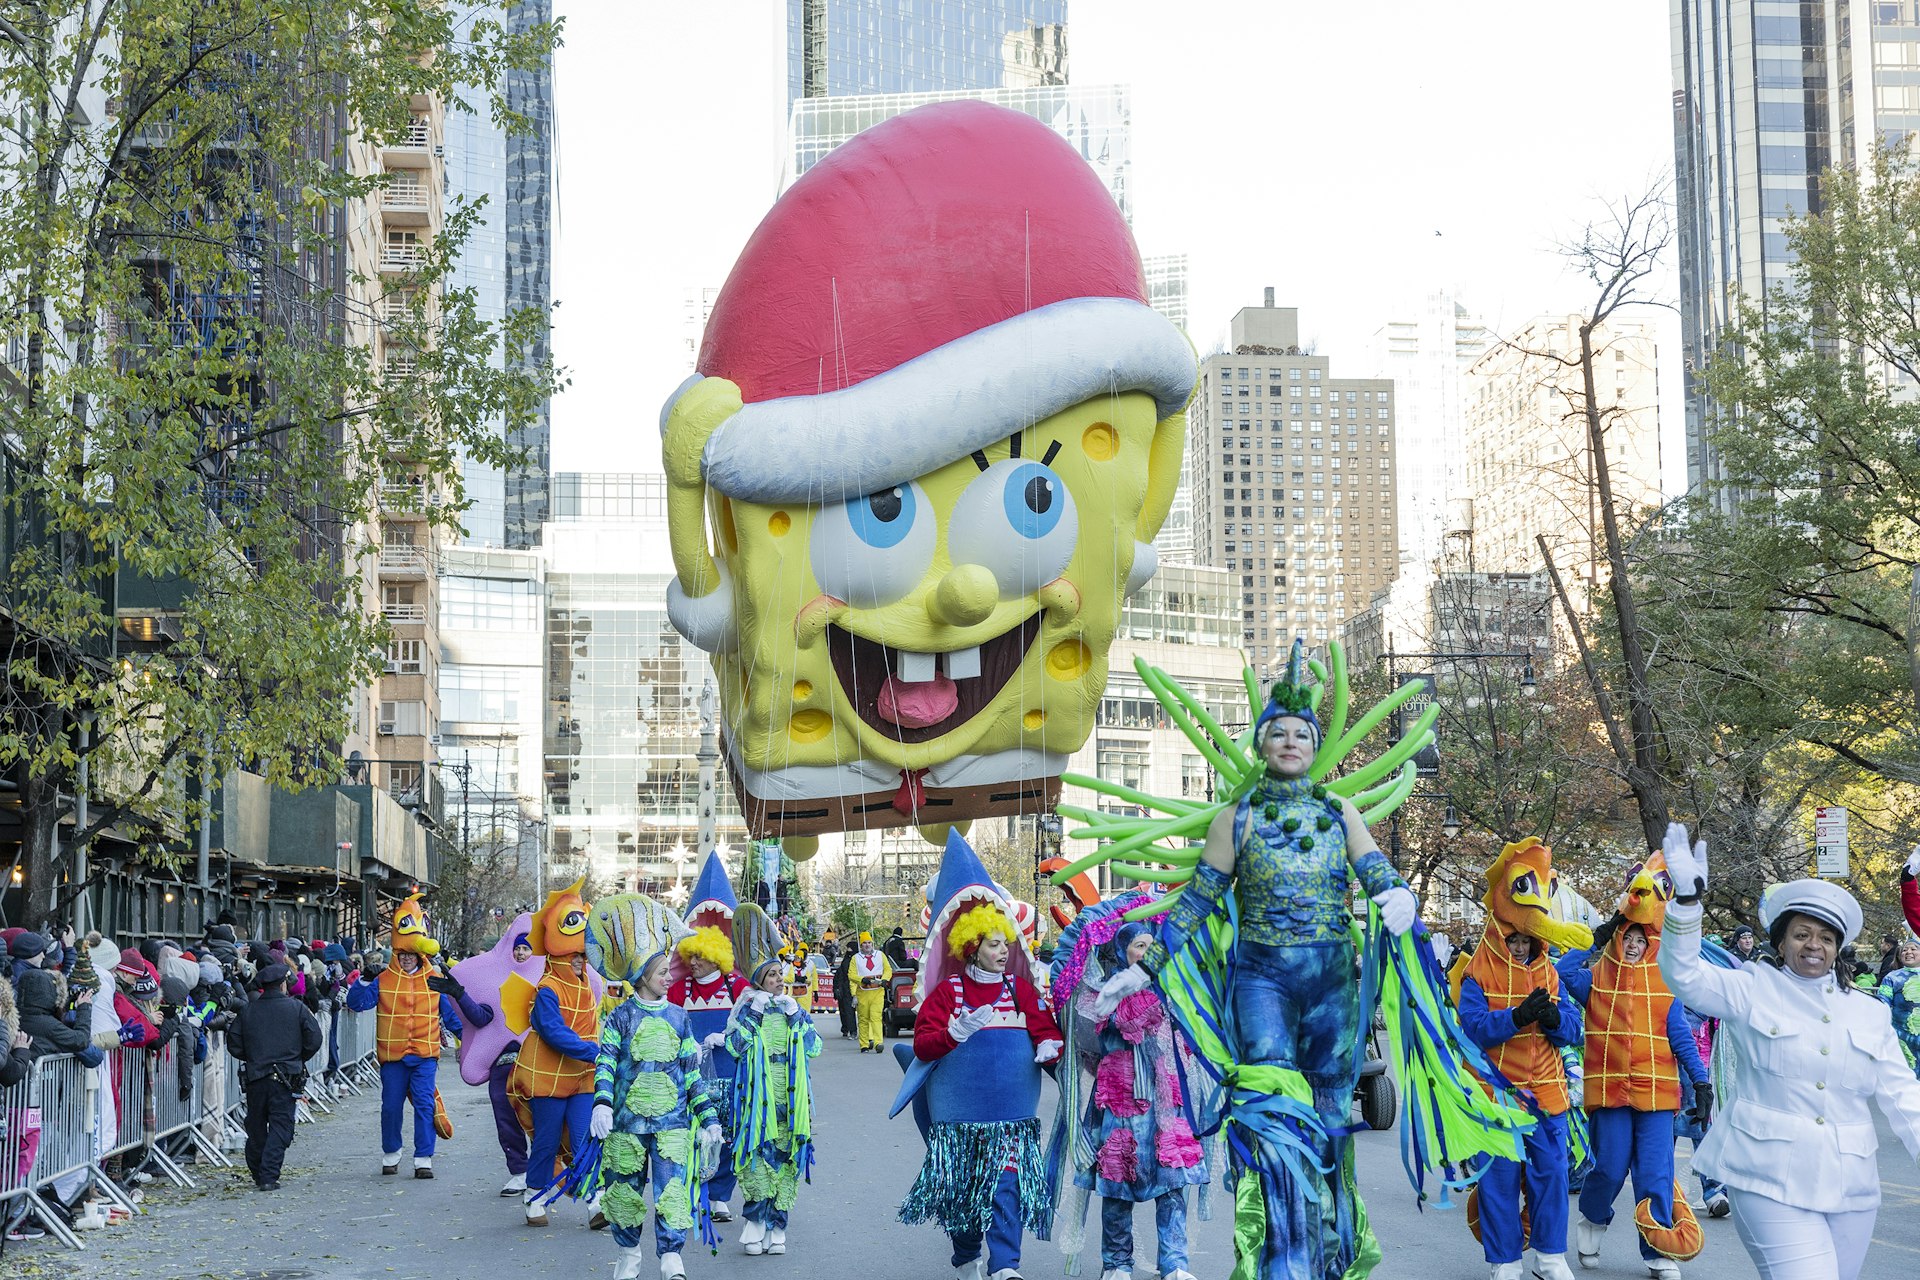 SpongeBob SquarePants giant balloon floats at 92nd Annual Macy's Thanksgiving Day Parade on the streets of Manhattan in frigid weather.